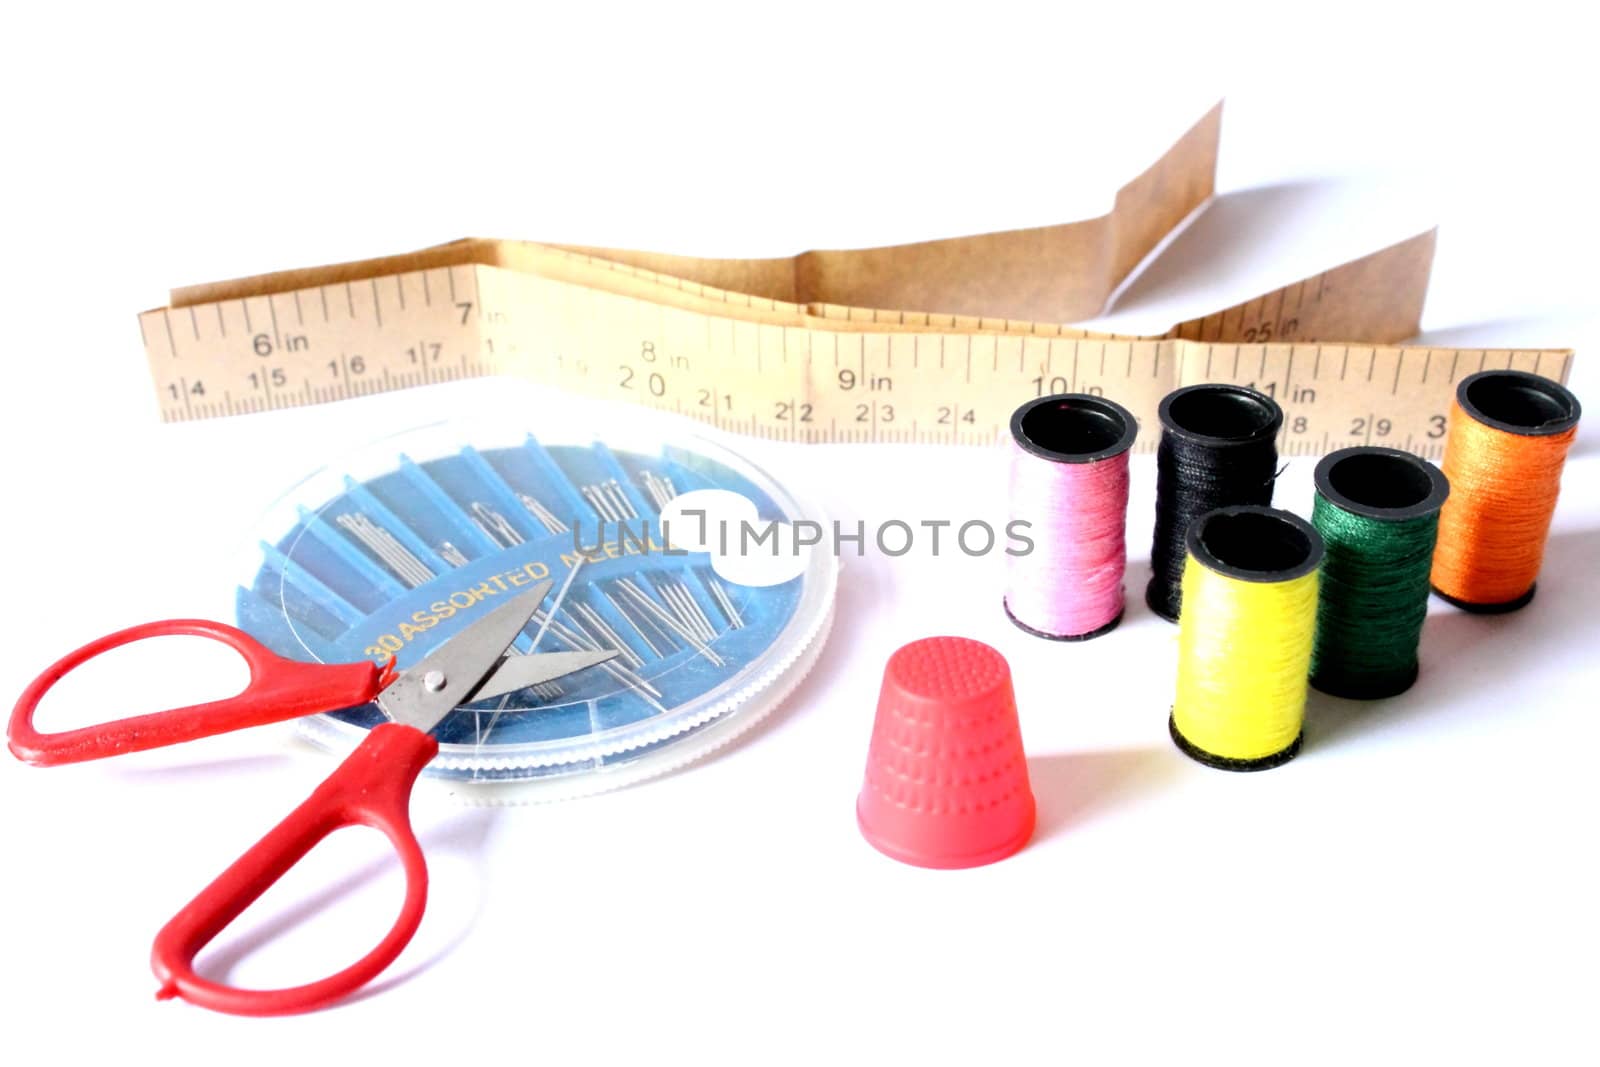 Isolated sewing kit with scissors, thimble, thread, needles, and tape measure.